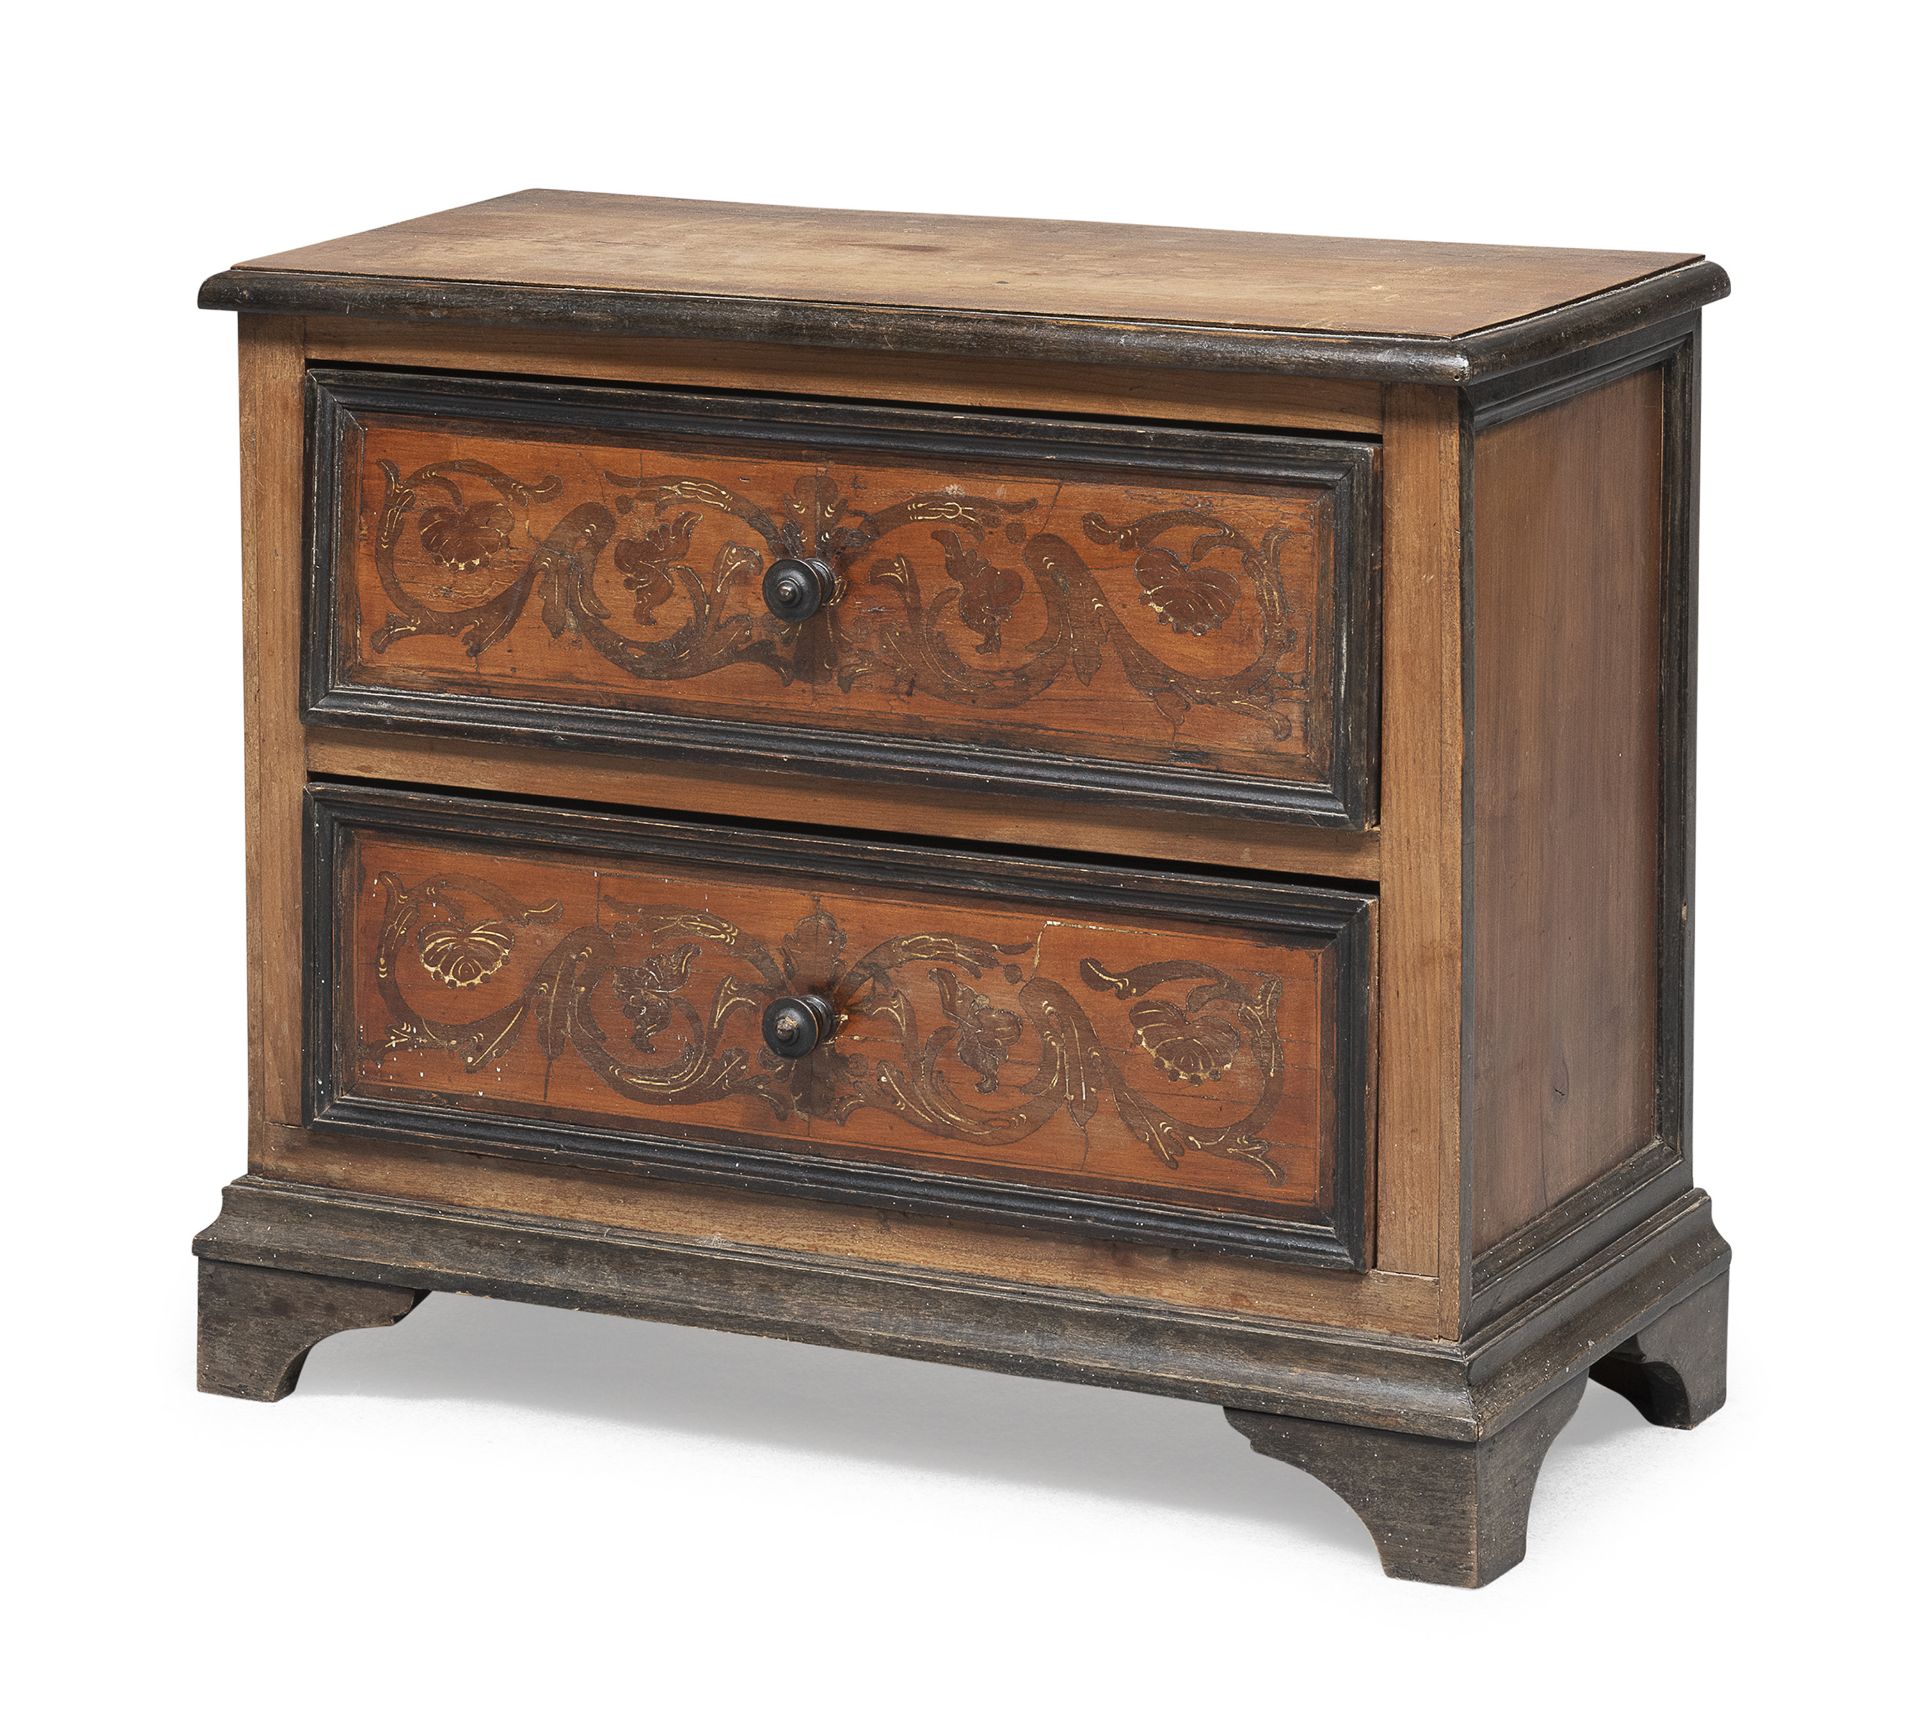 LOW WALNUT NIGHTSTAND ELEMENTS OF THE 18TH CENTURY